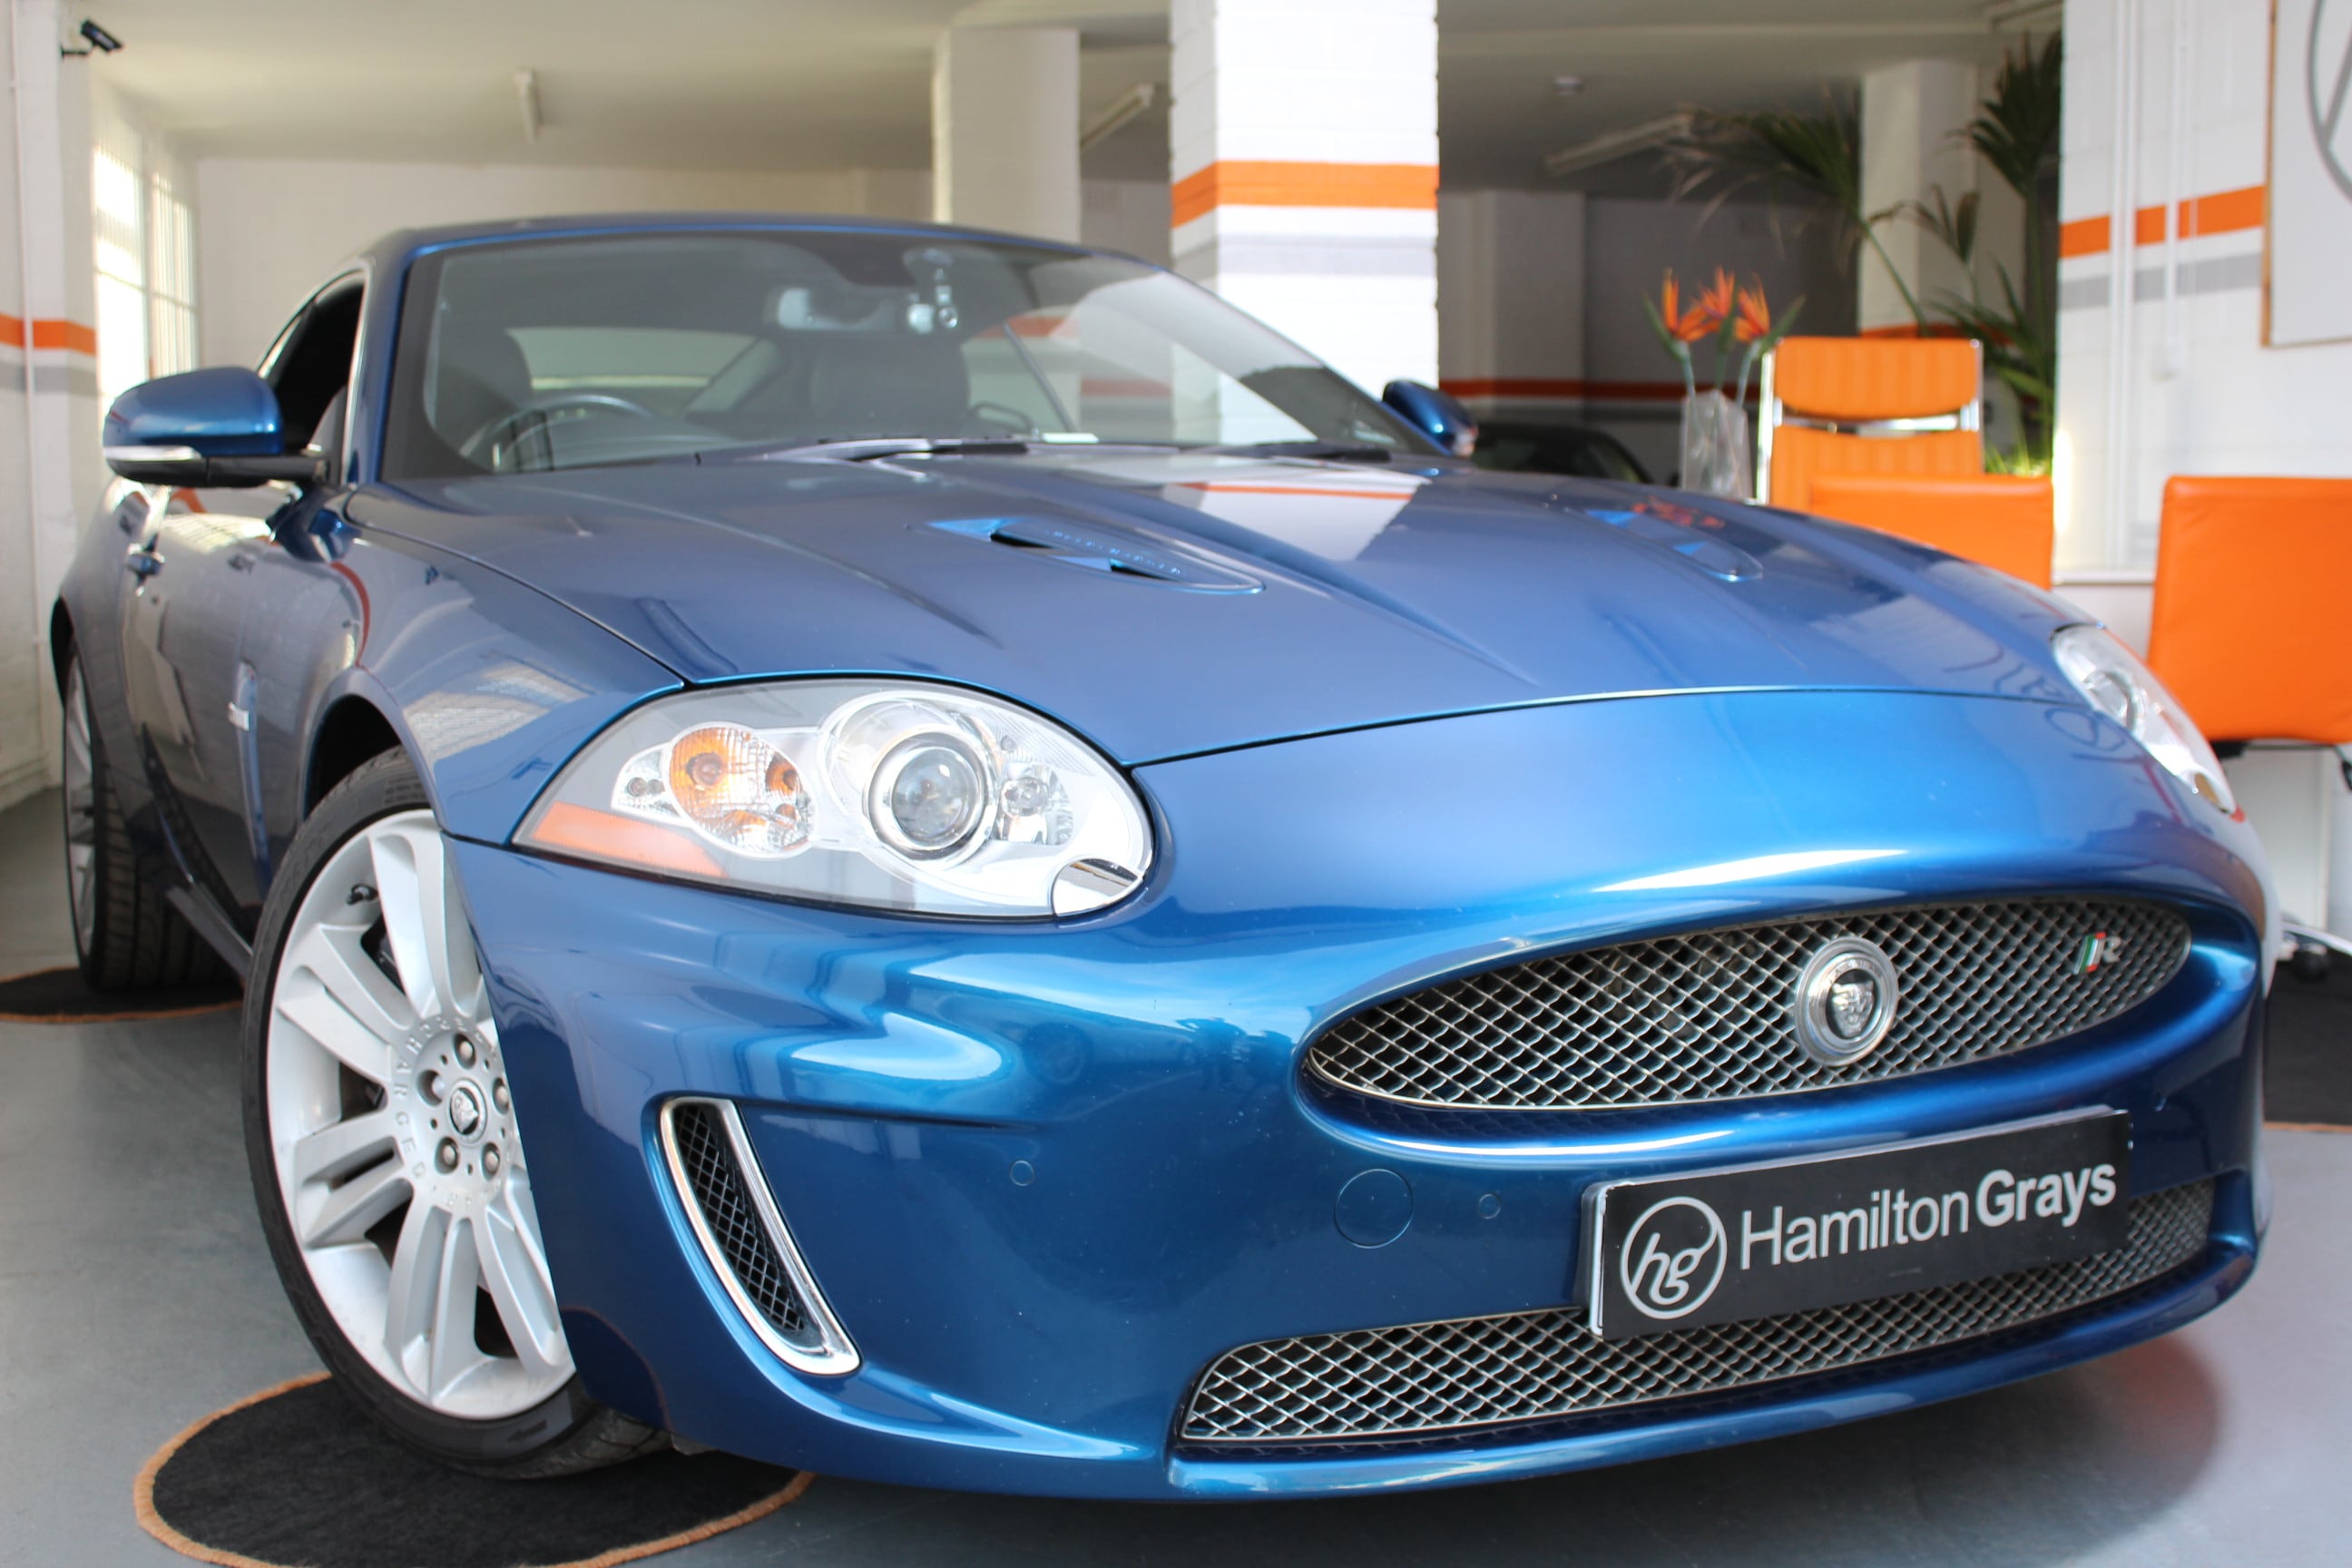 2009 (09) JAGUAR XKR 5.0 SUPERCHARGED 2DR WITH ONLY 27,530 MILES! FSH! STUNNING EXAMPLE (SOLD)